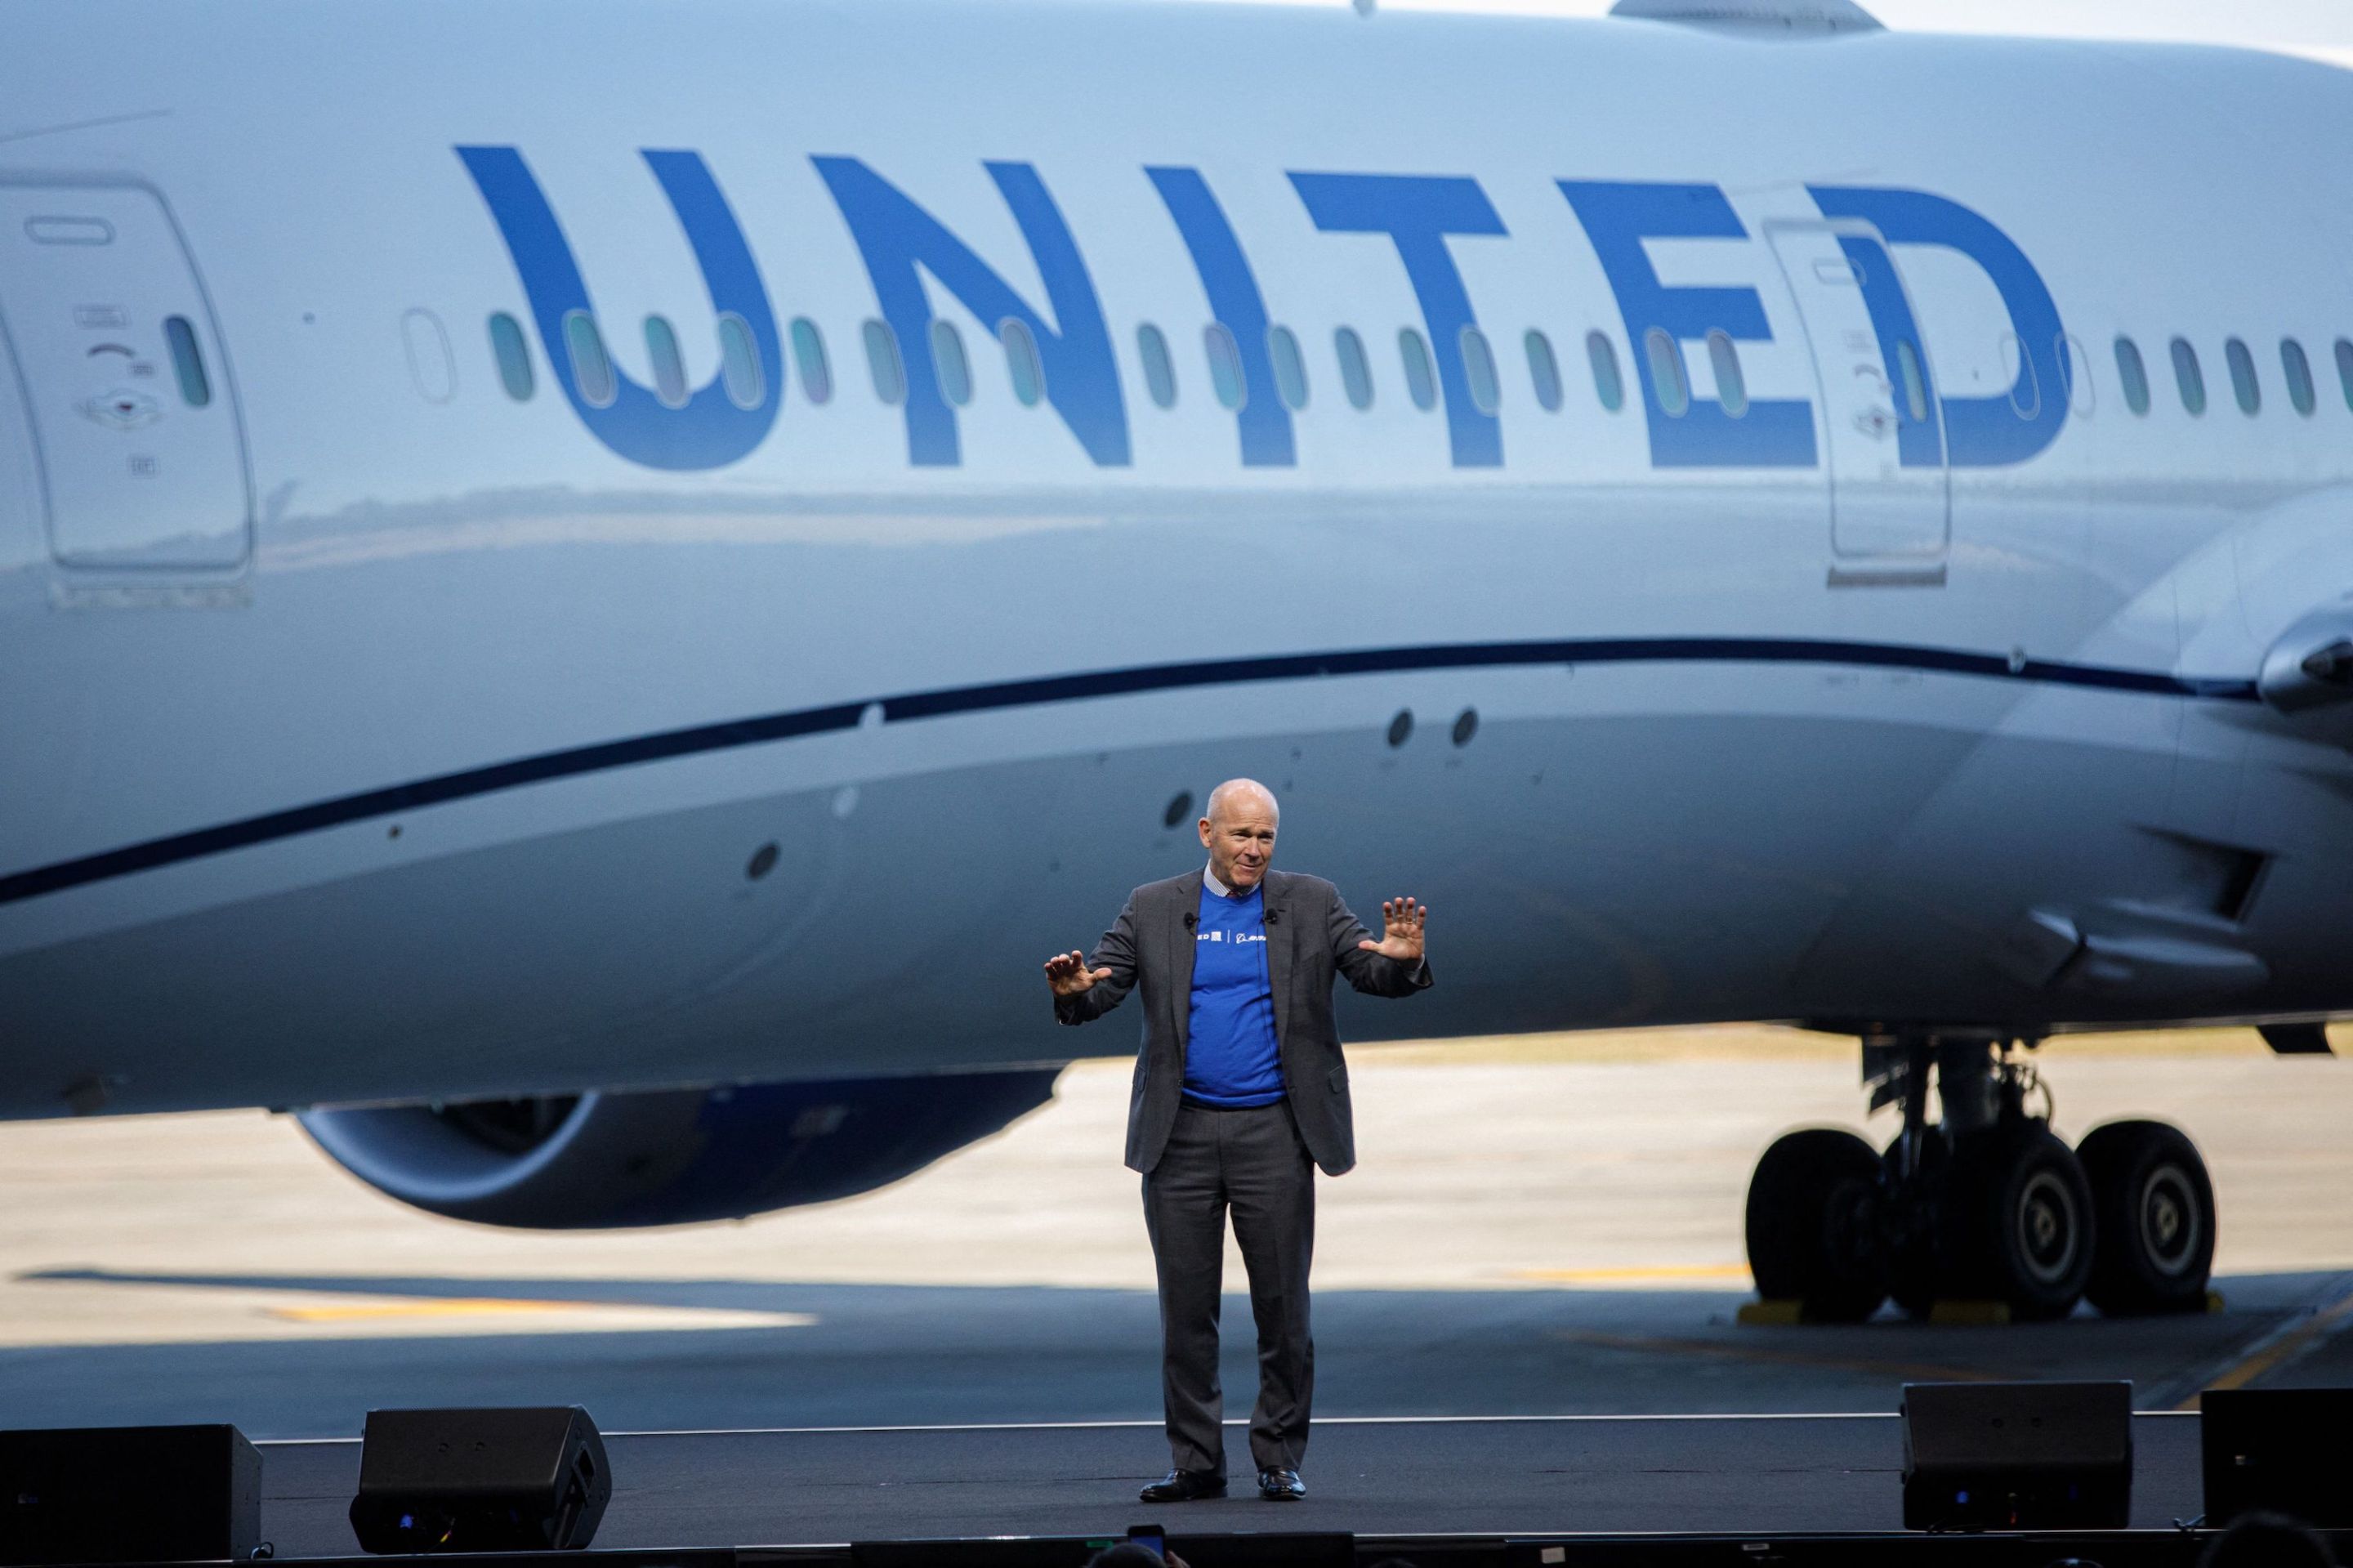 Boeing CEO David Calhoun speaks during a joint press event with United Airlines at the Boeing manufacturing facility in North Charleston, on December 13, 2022.